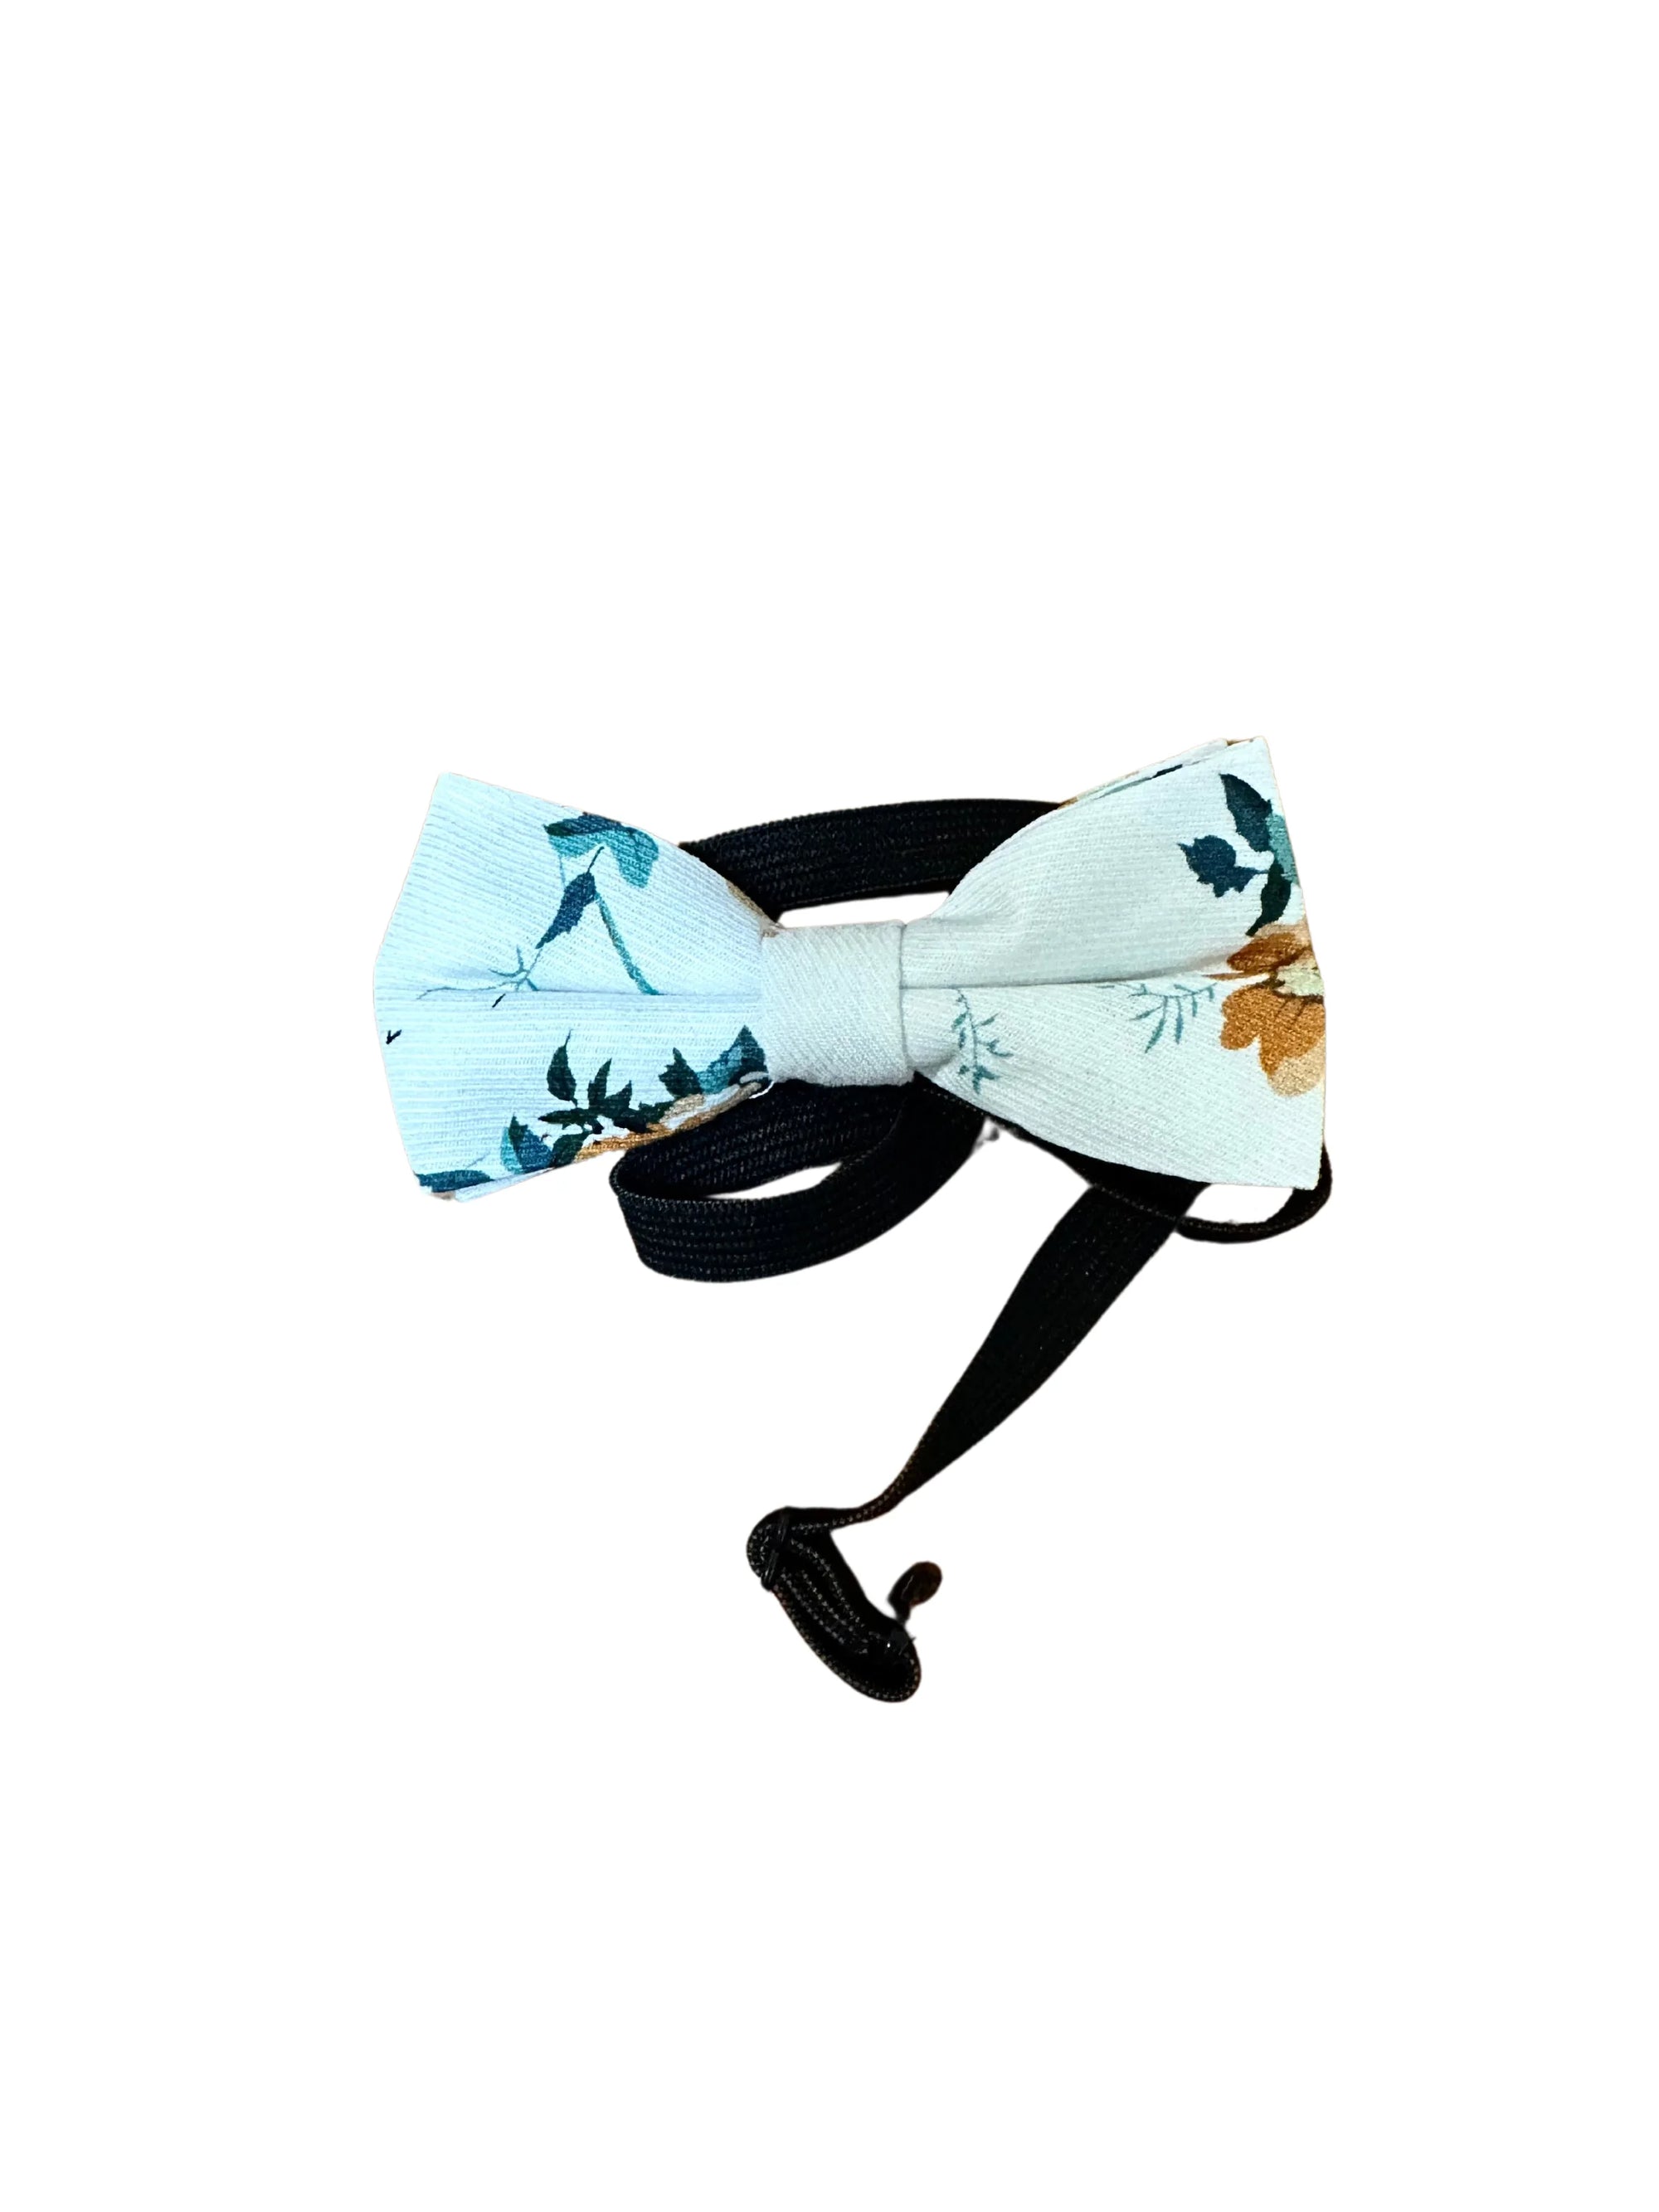 White Floral Bow tie for kids kennedy floral bow tie for kids toddlers baby babies.